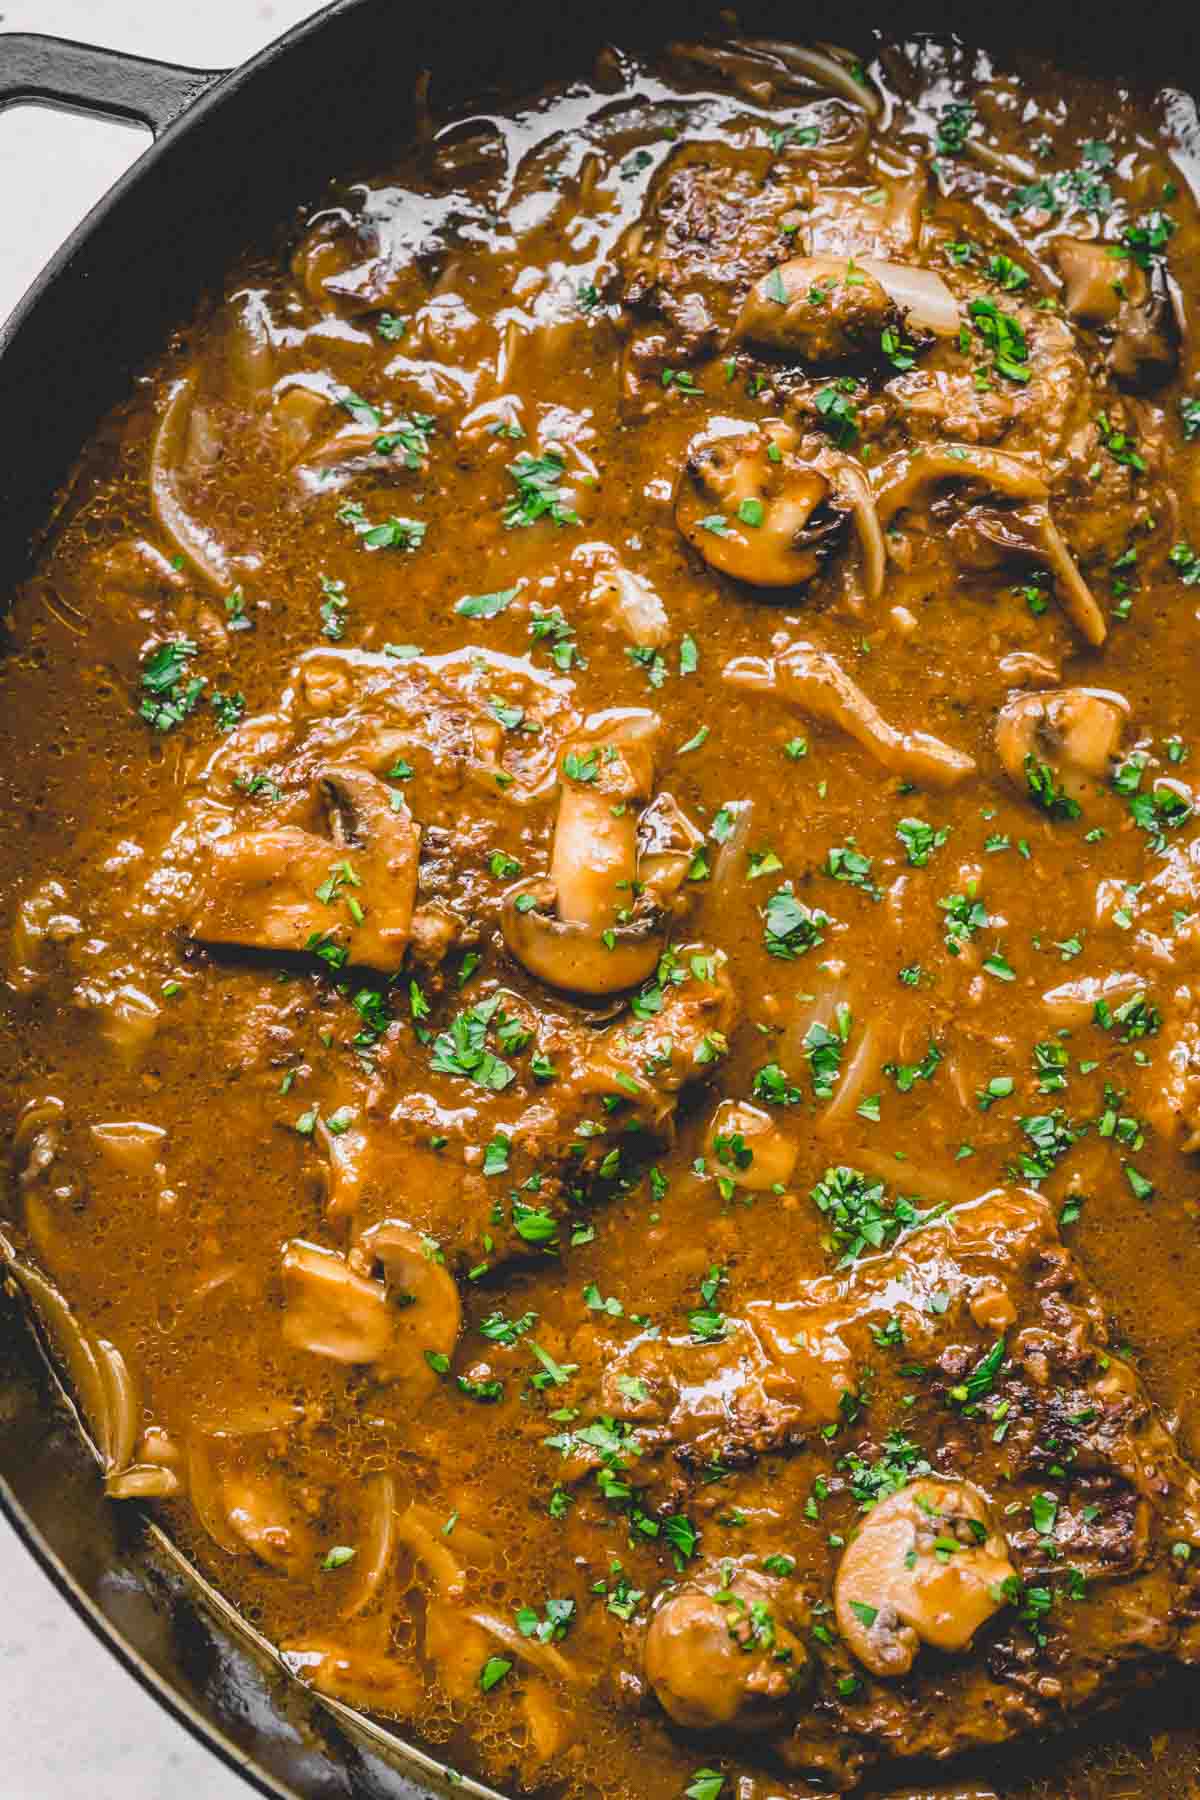 Smothered steak with mushroom gravy in a skillet.